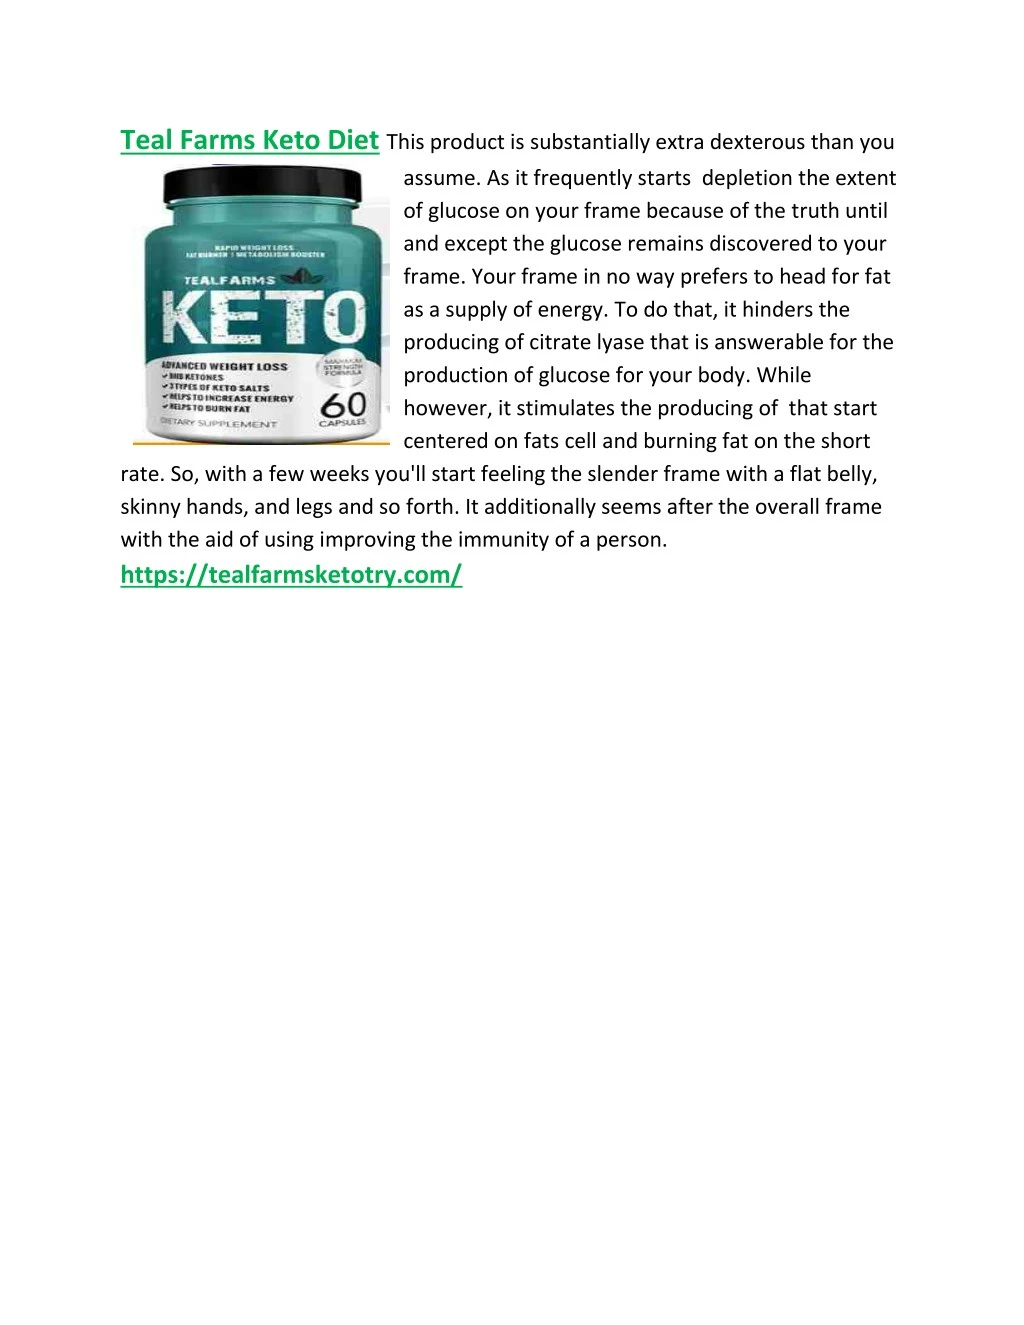 teal farms keto diet this product